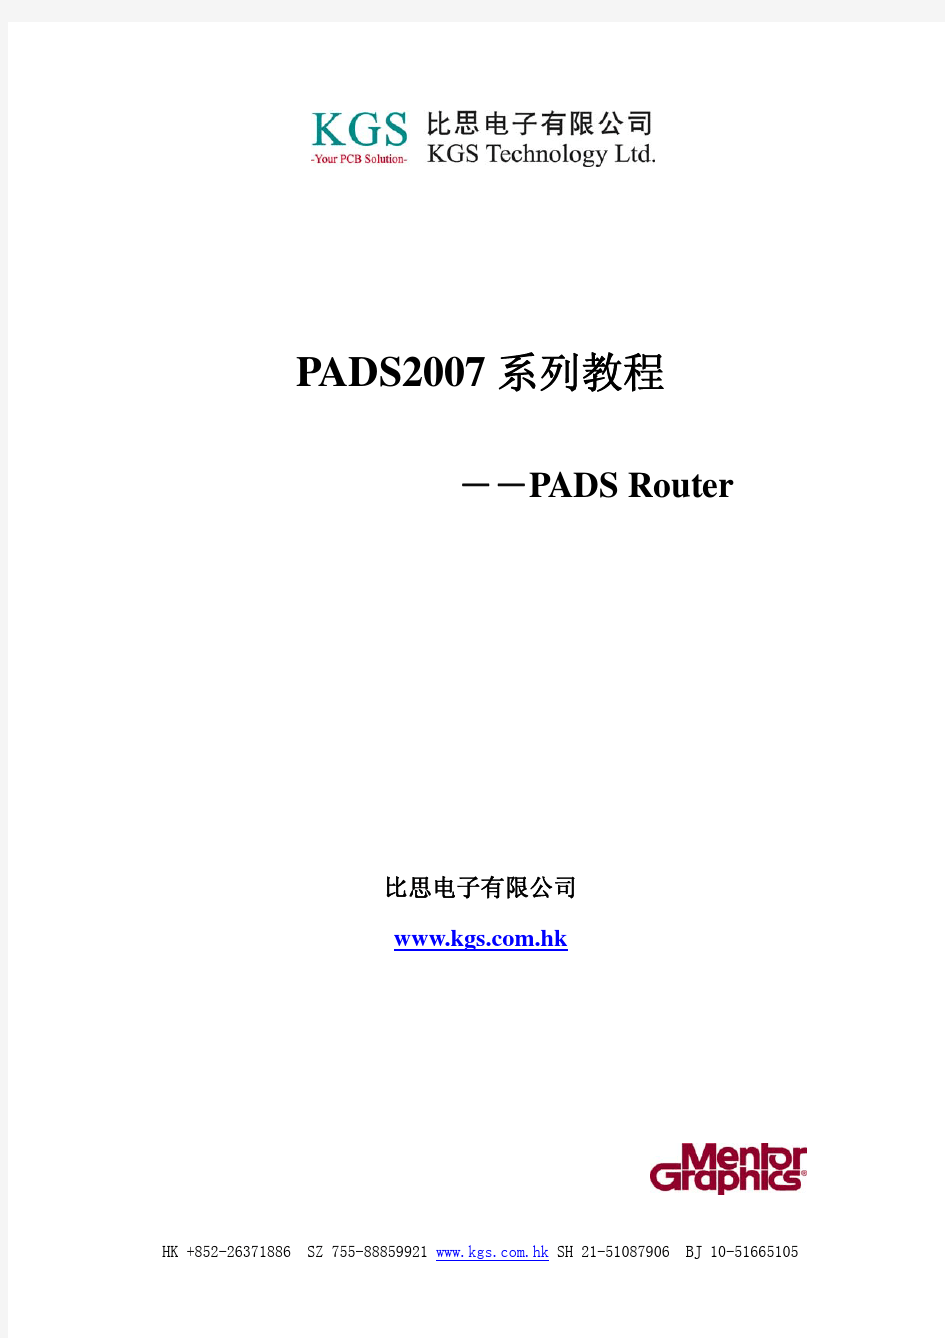 PADS2007 ROUTER中文教程